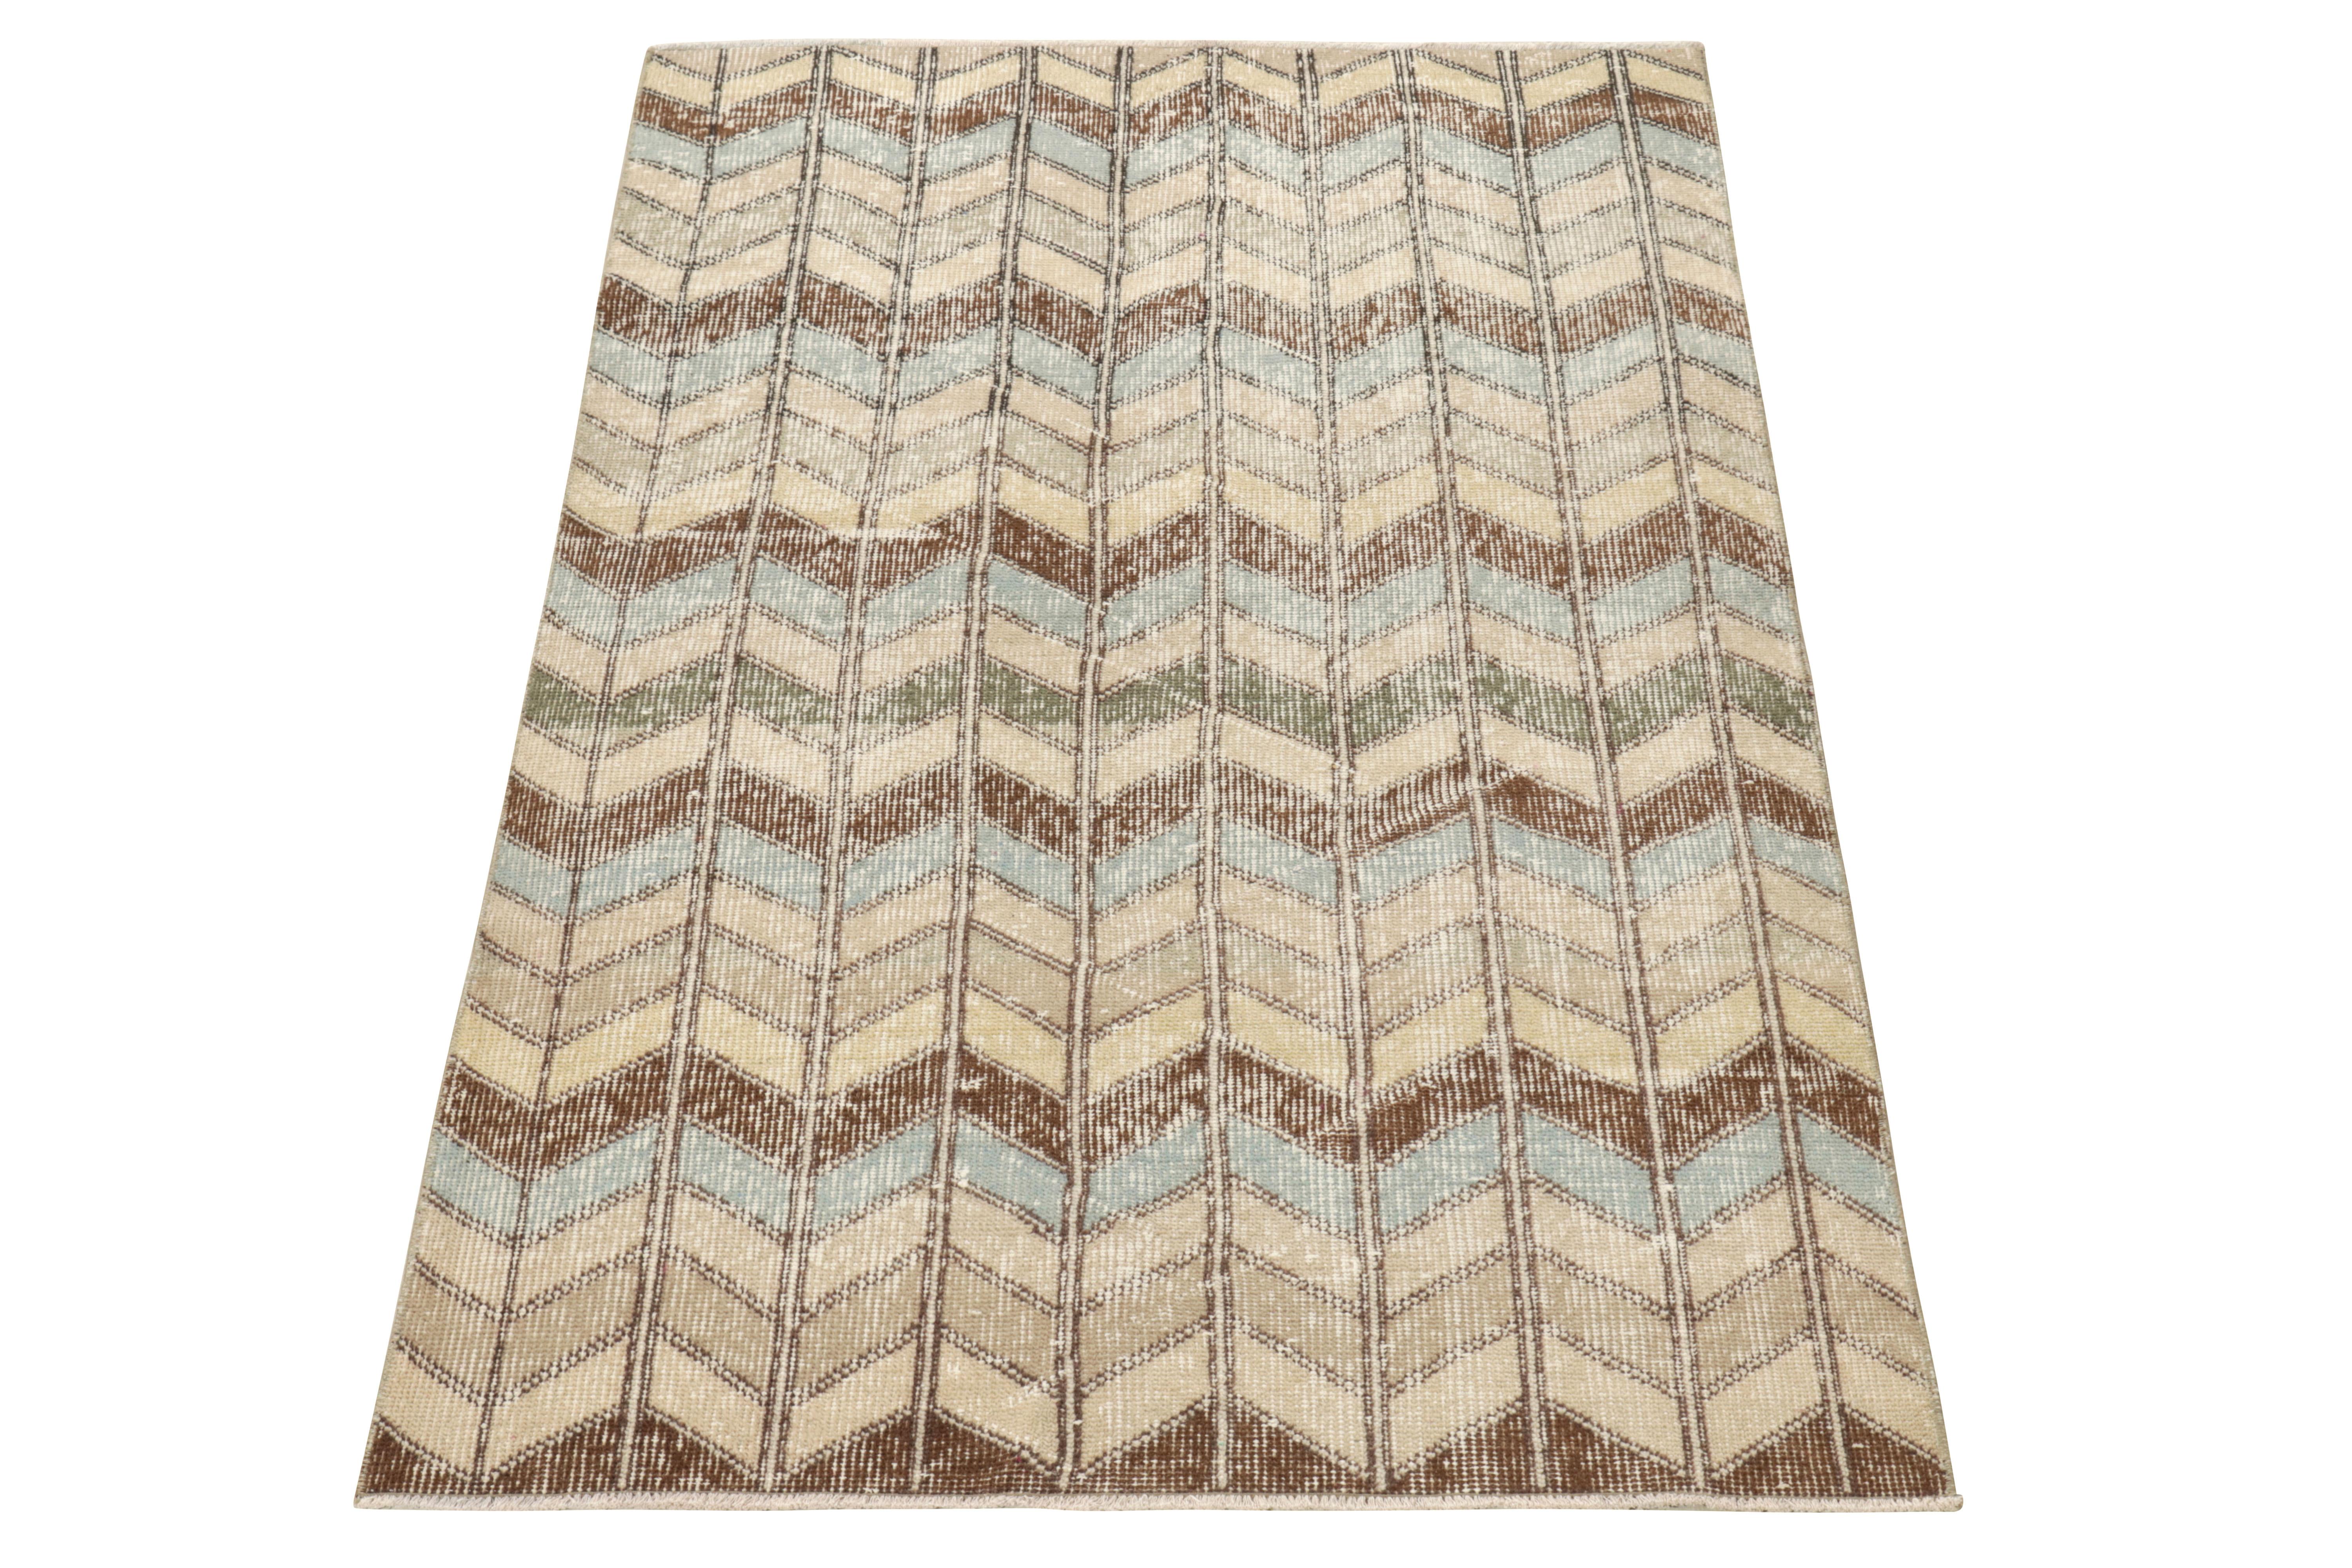 Hand-knotted in wool originating from Turkey between 1960-1970, this vintage mid-century runner joins our Midcentury Pasha collection celebrating Turkish icon Zeki Müren with Josh’s hand picked favorites from this period. The midcentury style takes